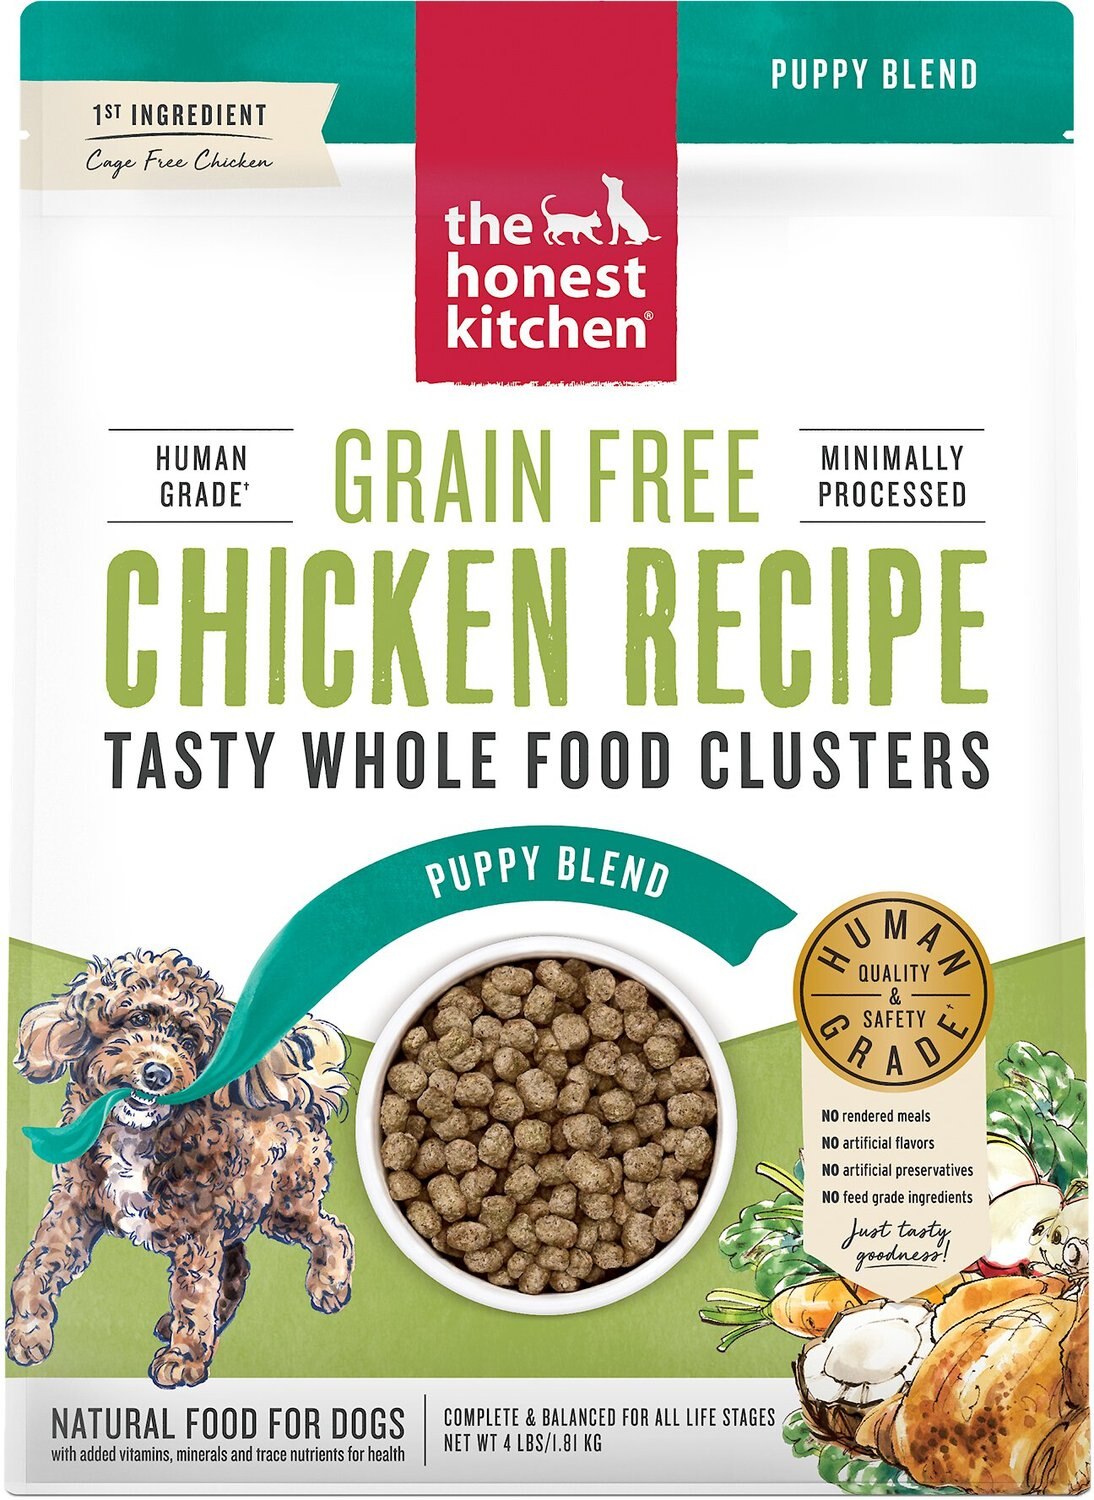 THE HONEST KITCHEN Whole Food Clusters 